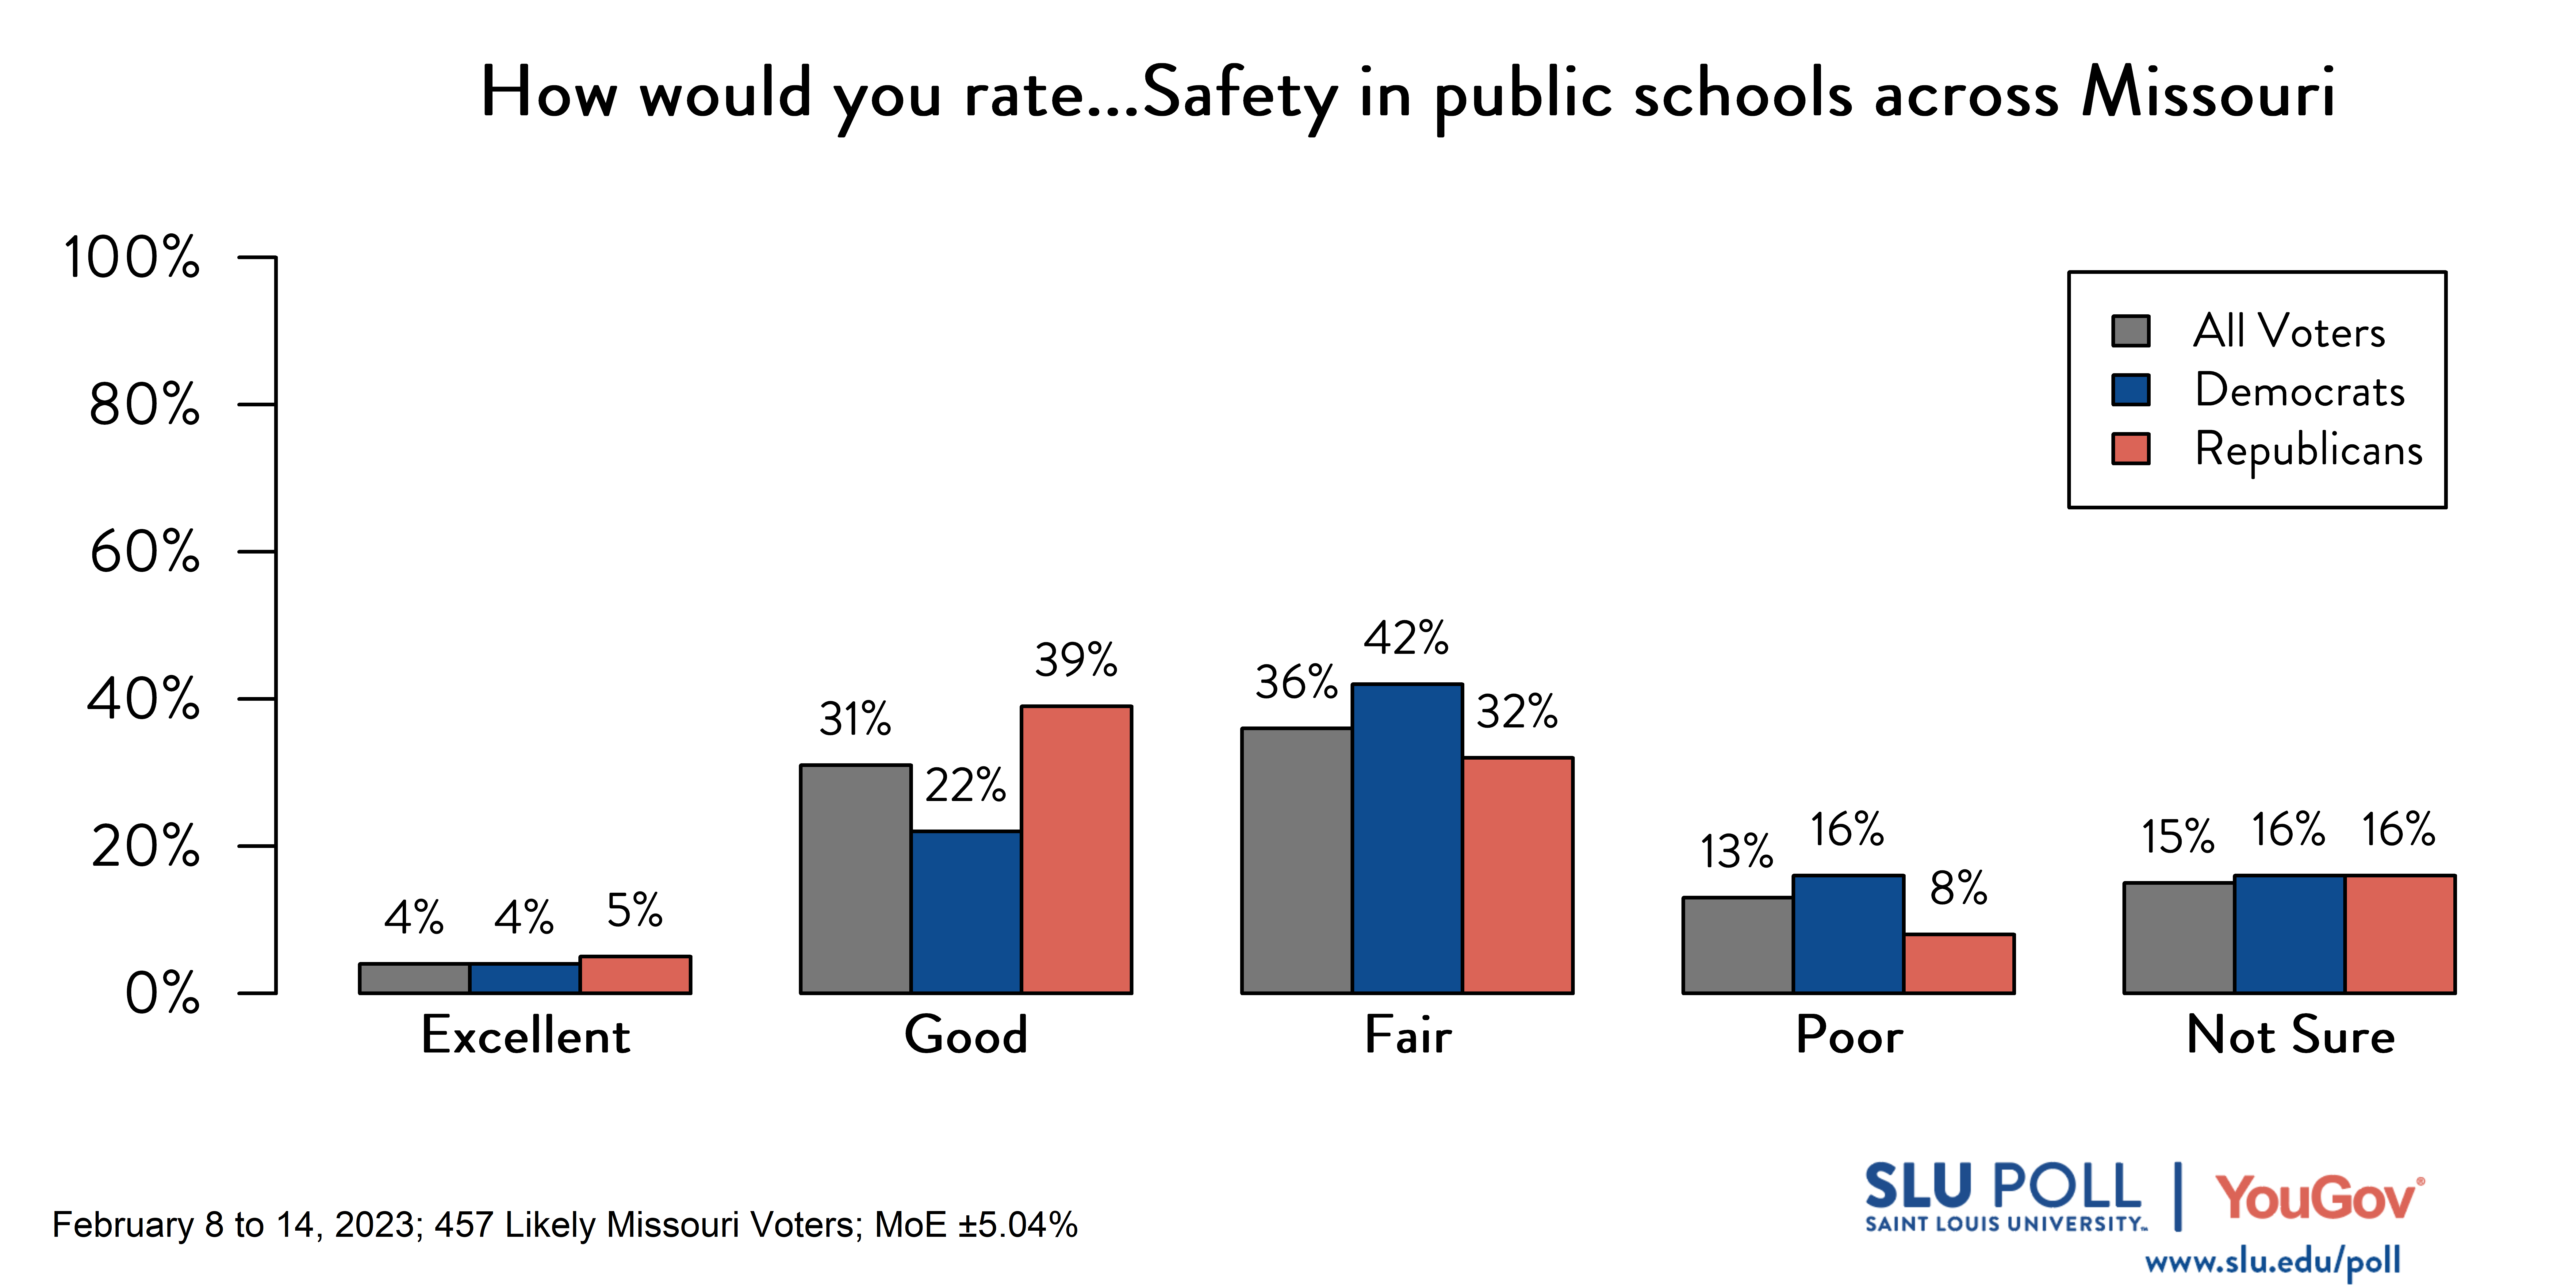 Likely voters' responses to 'How would you rate the condition of the following: Safety in public schools across Missouri?': 4% Excellent, 31% Good, 36% Fair, 13% Poor, and 15% Not sure. Democratic voters' responses: ' 4% Excellent, 22% Good, 42% Fair, 16% Poor, and 16% Not sure. Republican voters' responses: 5% Excellent, 39% Good, 32% Fair, 8% Poor, and 16% Not sure.